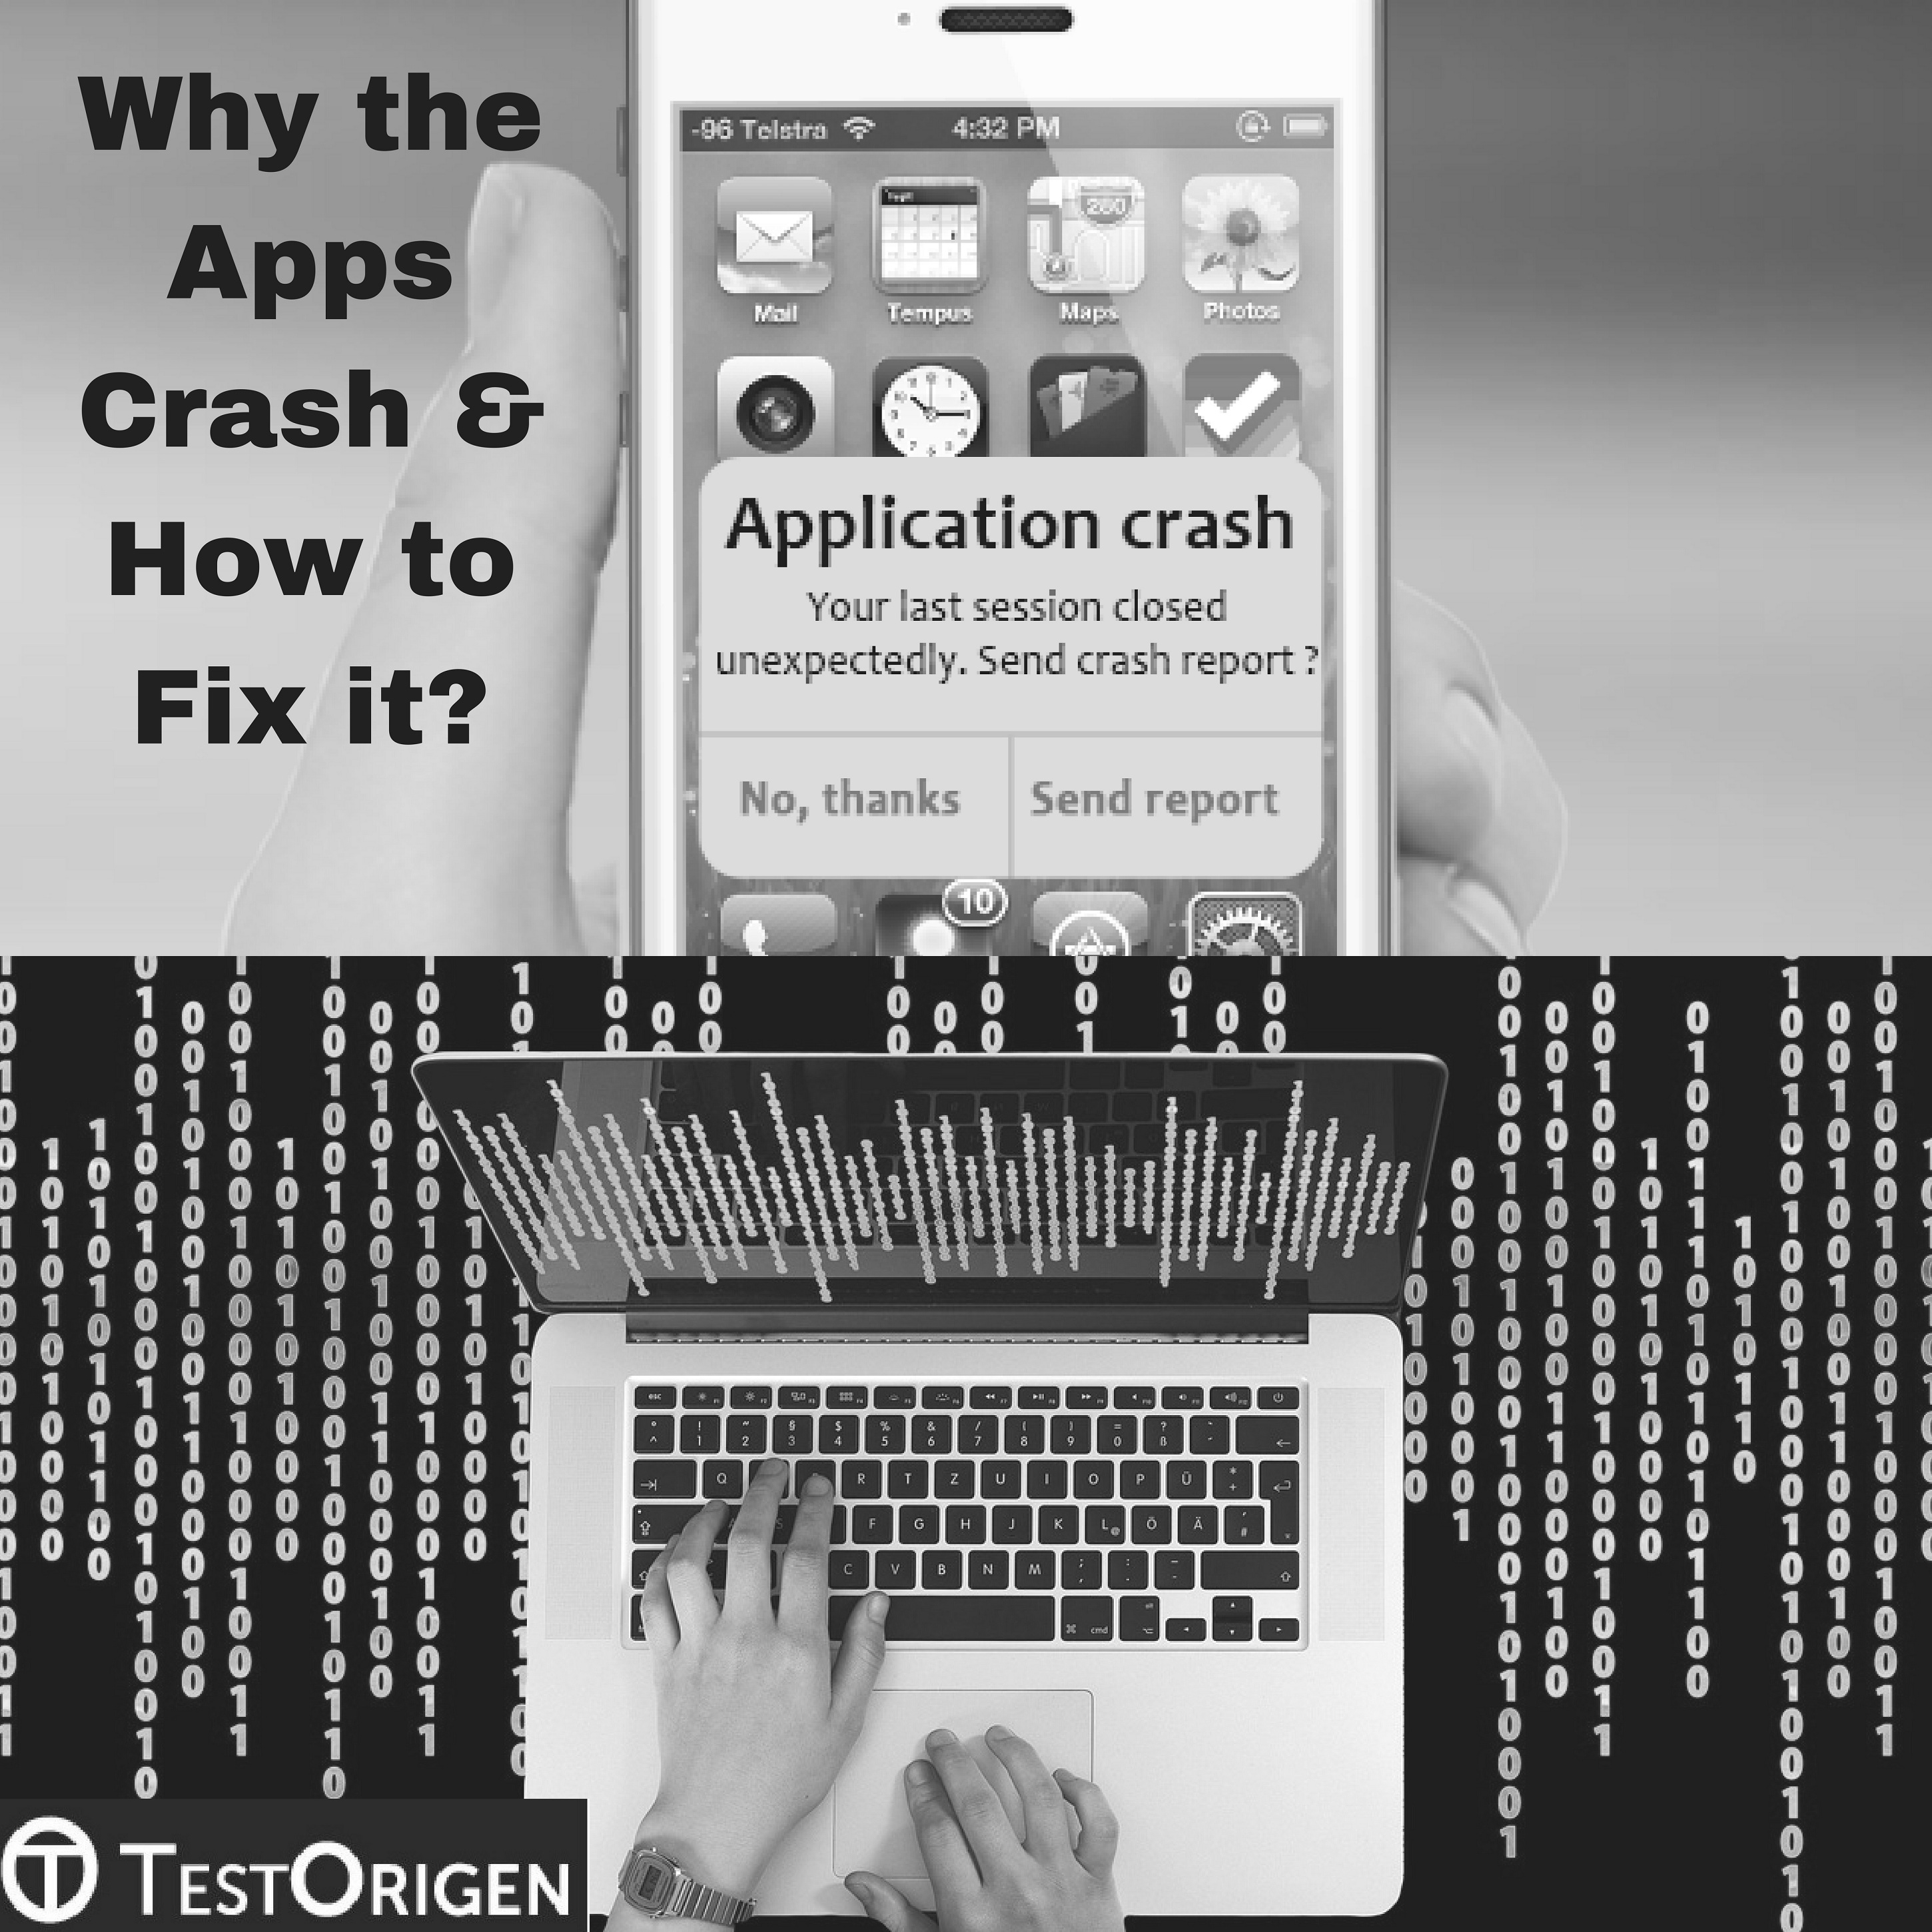 Why the Apps Crash & How to Fix it?